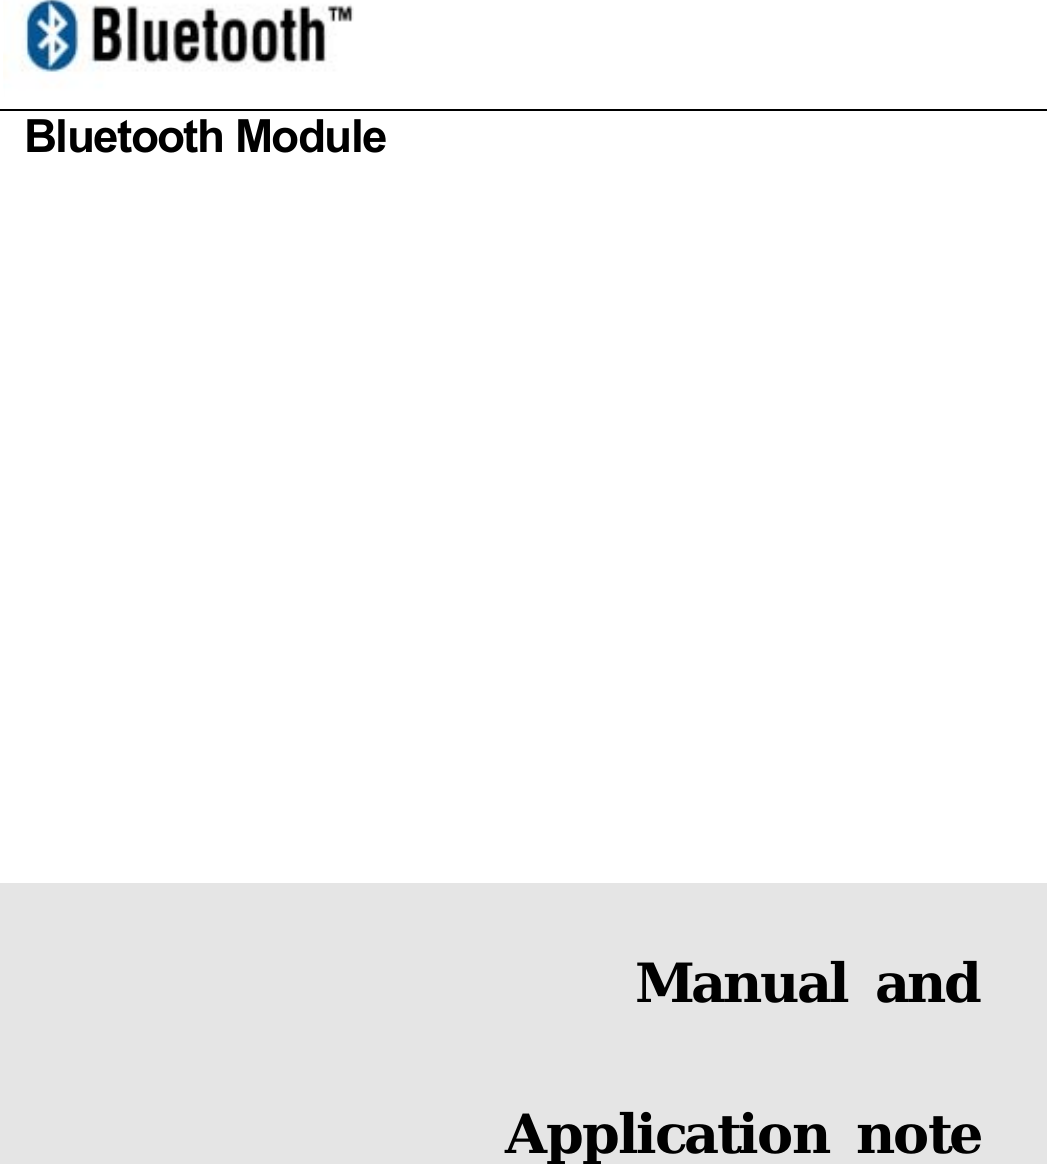  Bluetooth Module          Manual and Application note1.0